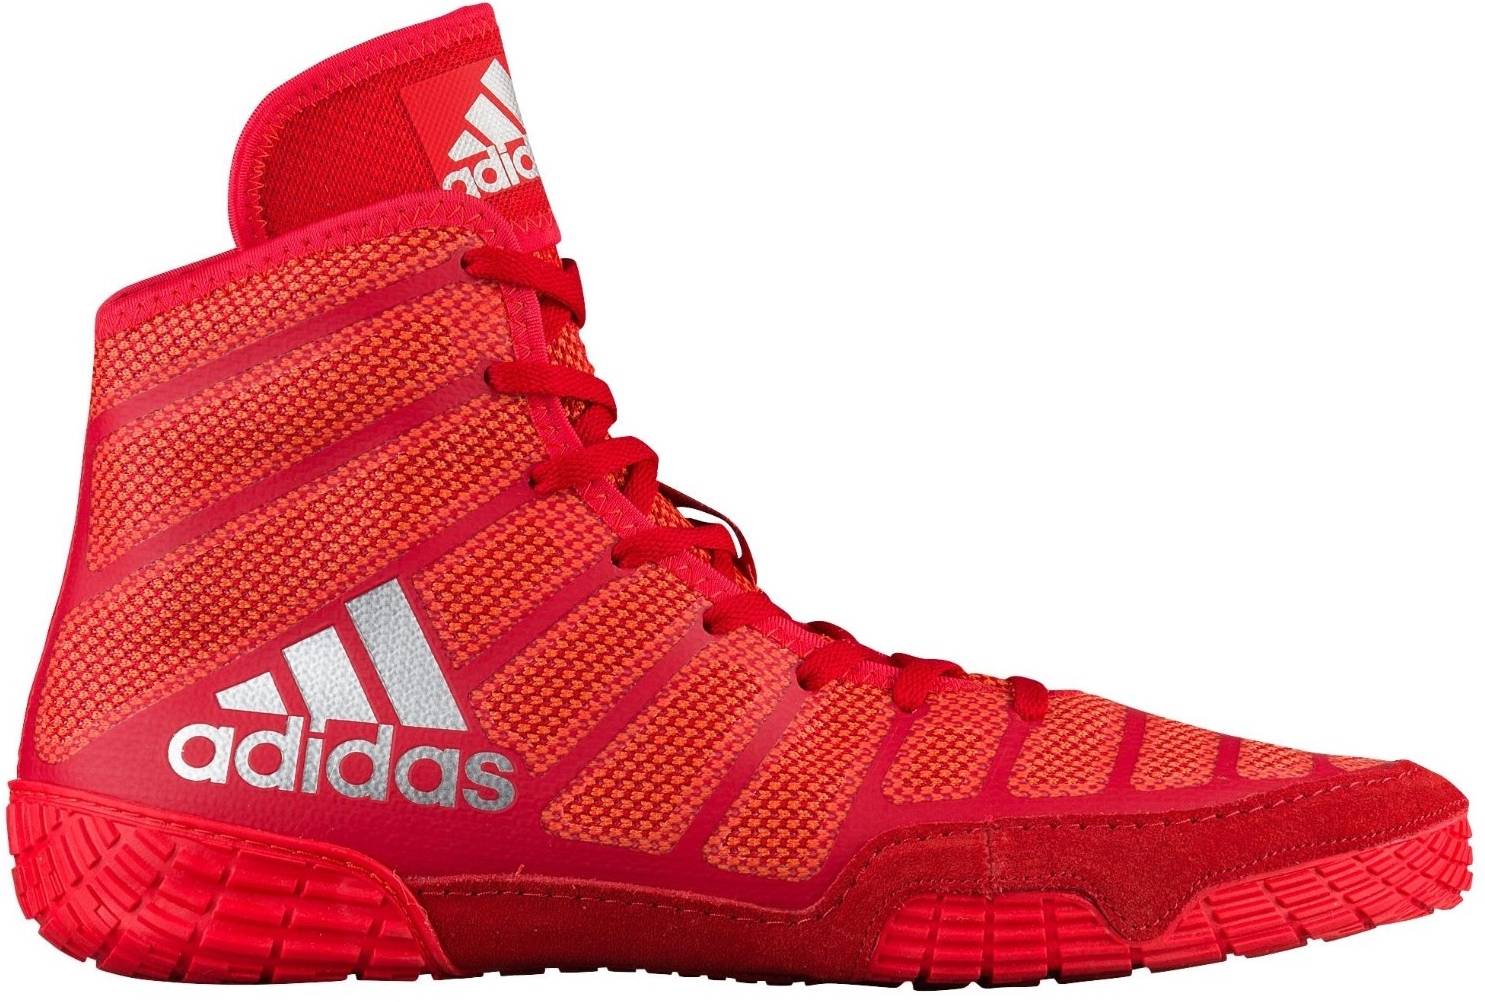 Save 34% on Red Adidas Wrestling Shoes 